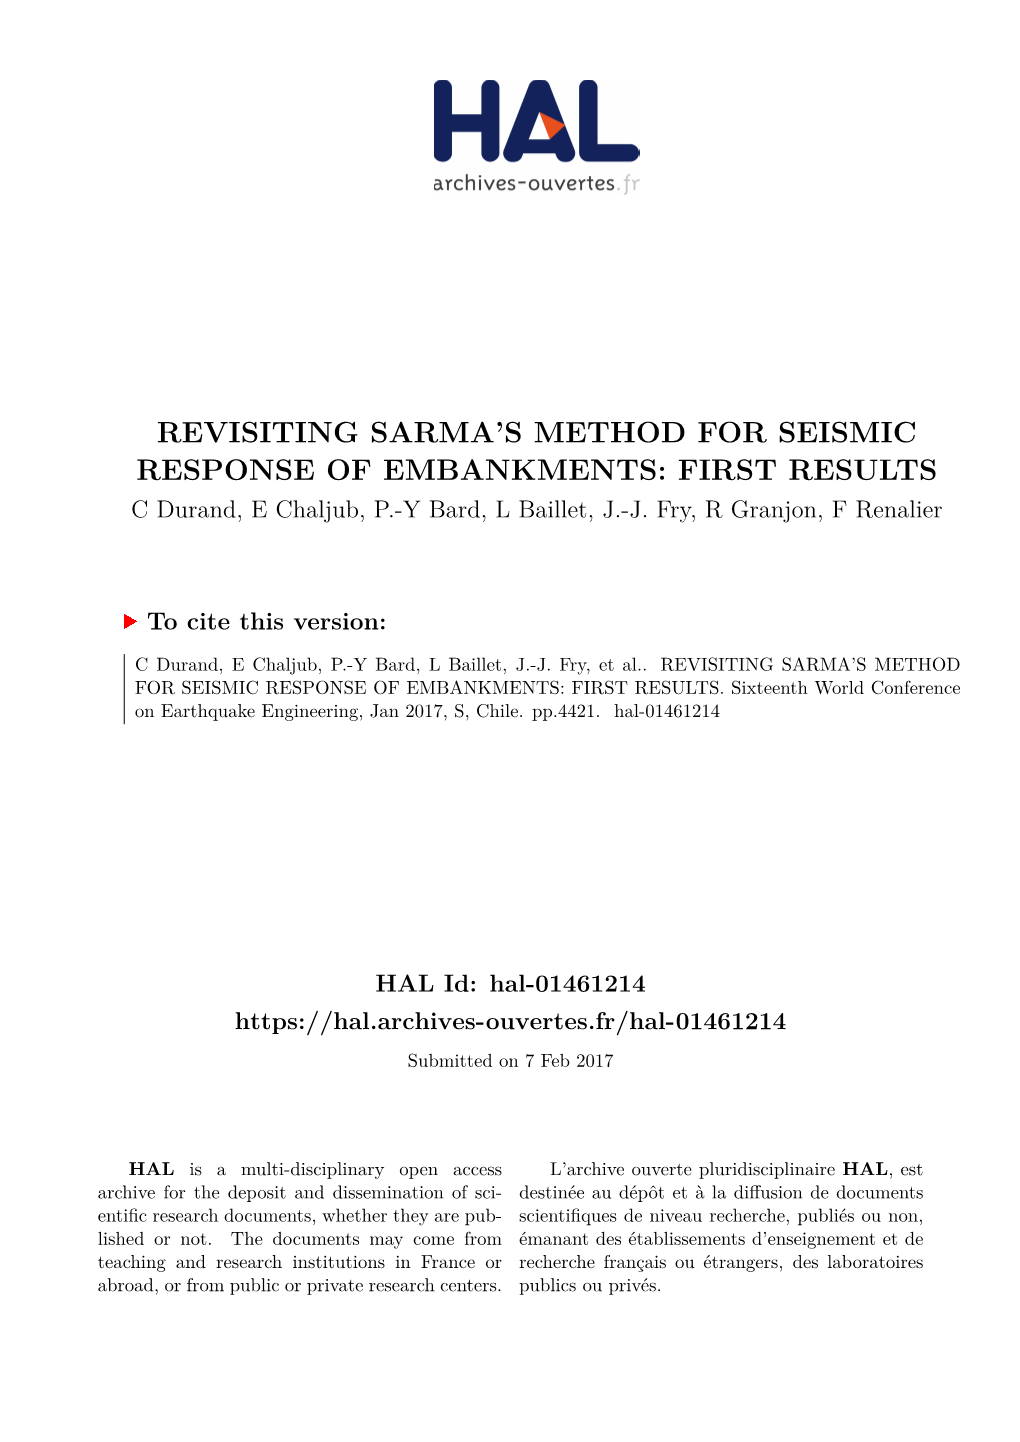 Revisiting Sarma's Method for Seismic